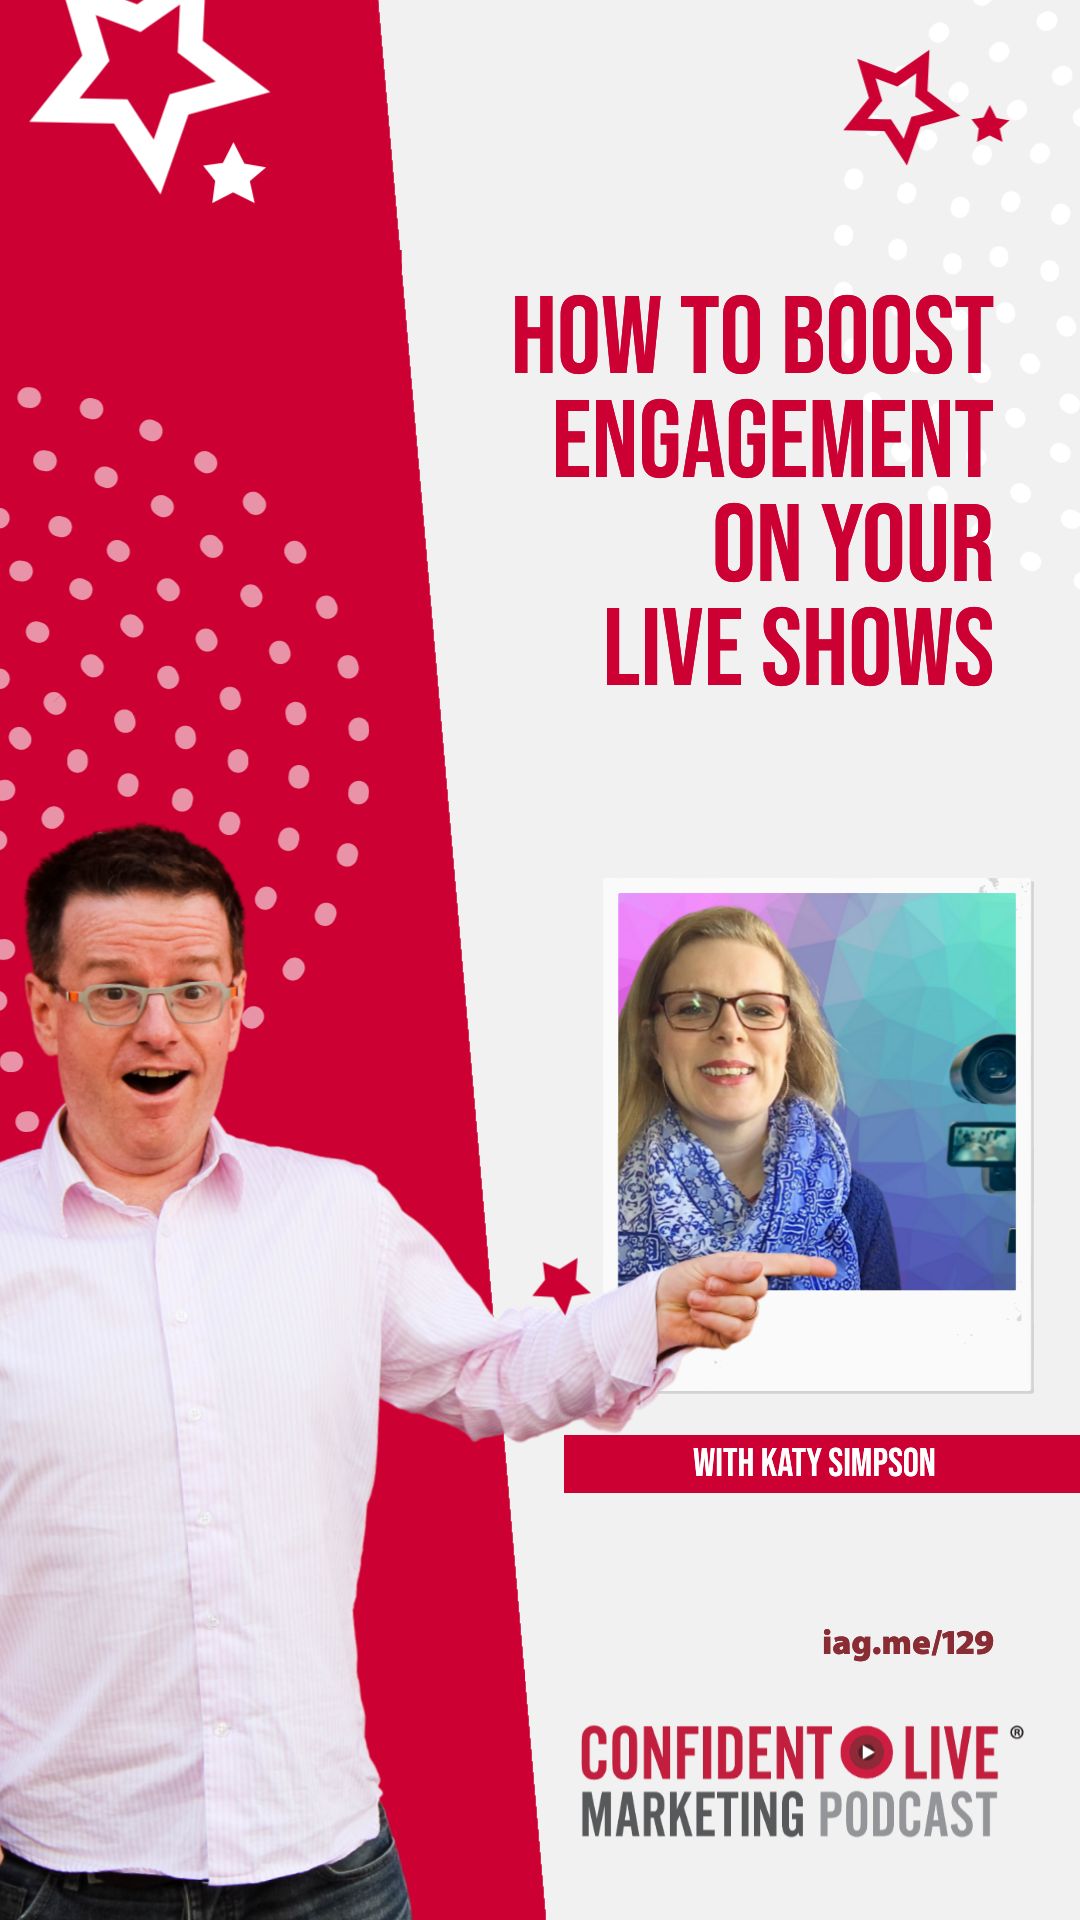 How to Boost Engagement on Your Live Shows